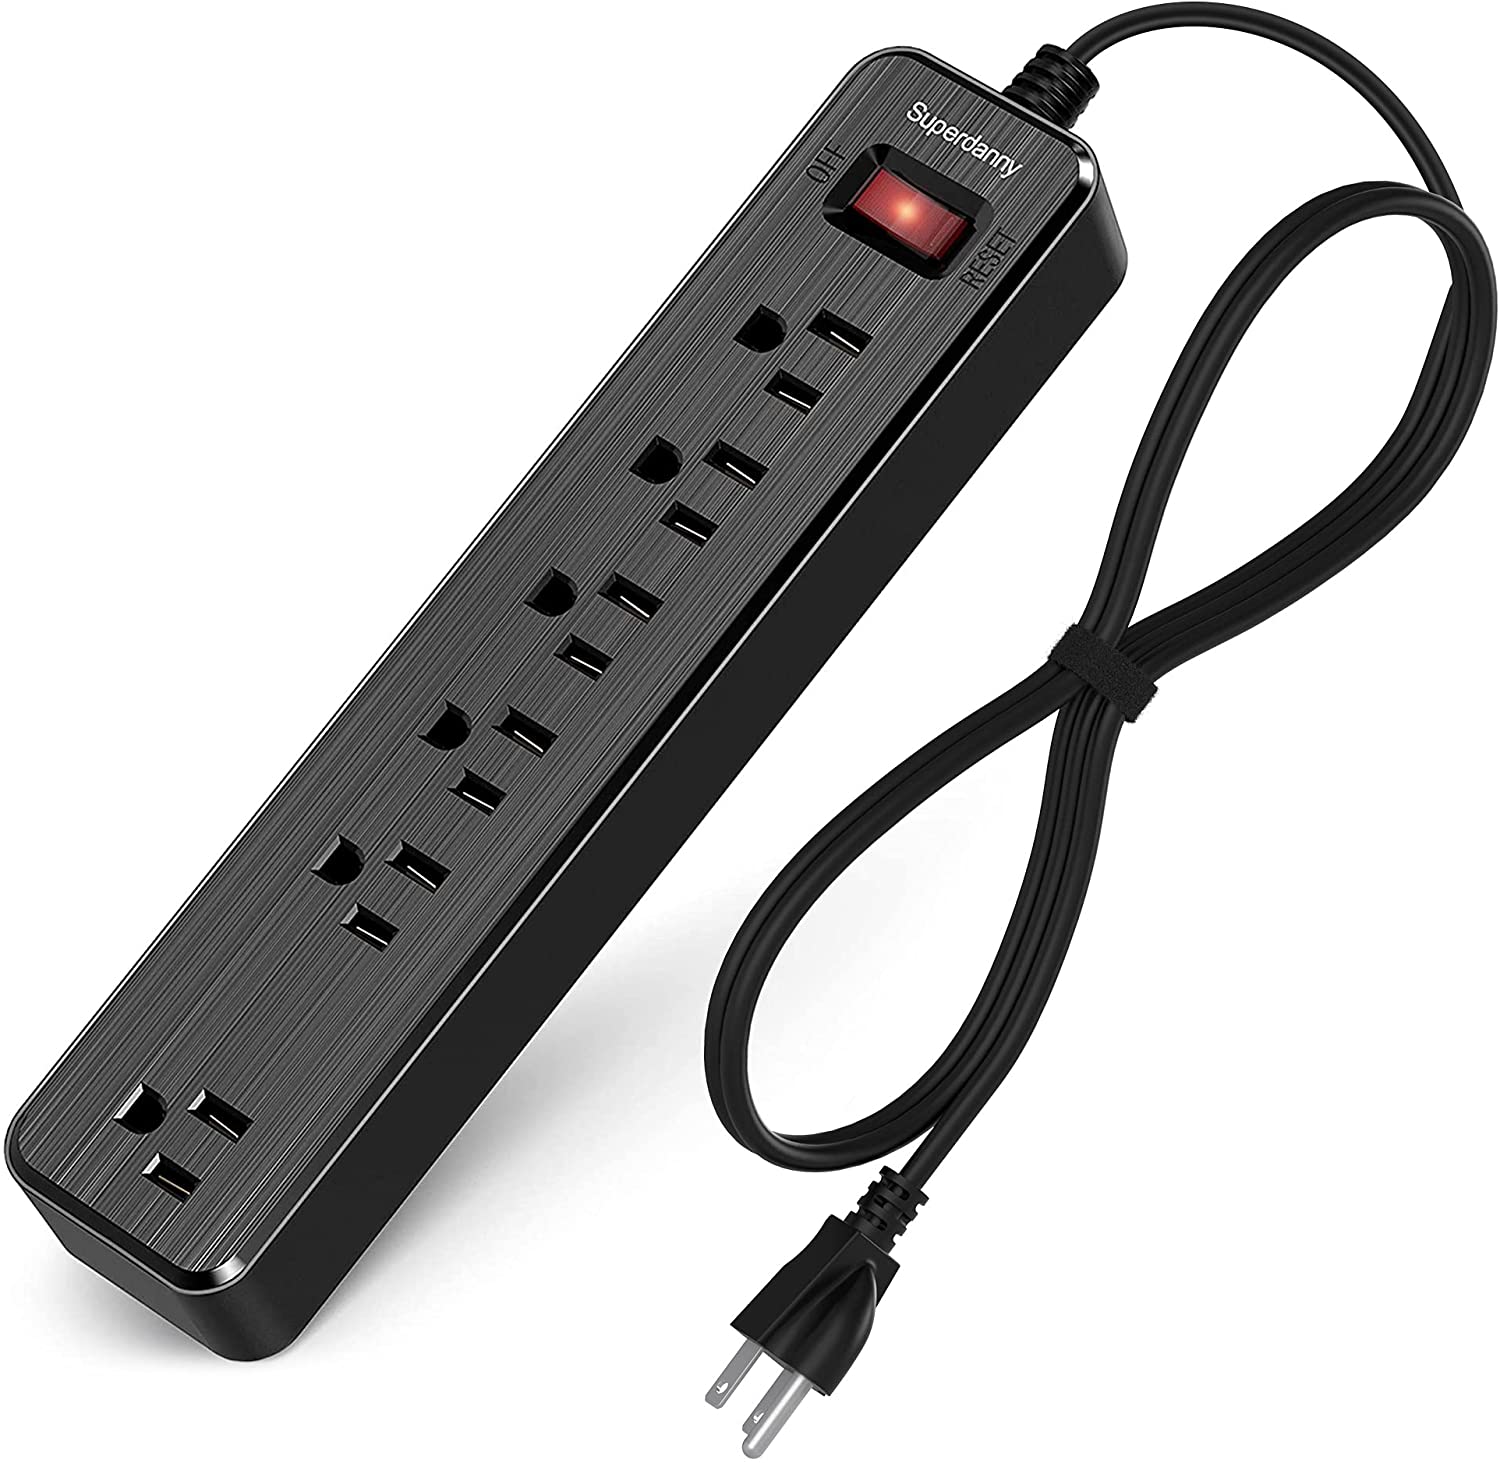 6 AC Outlets Surge Protector Power Strip 900J